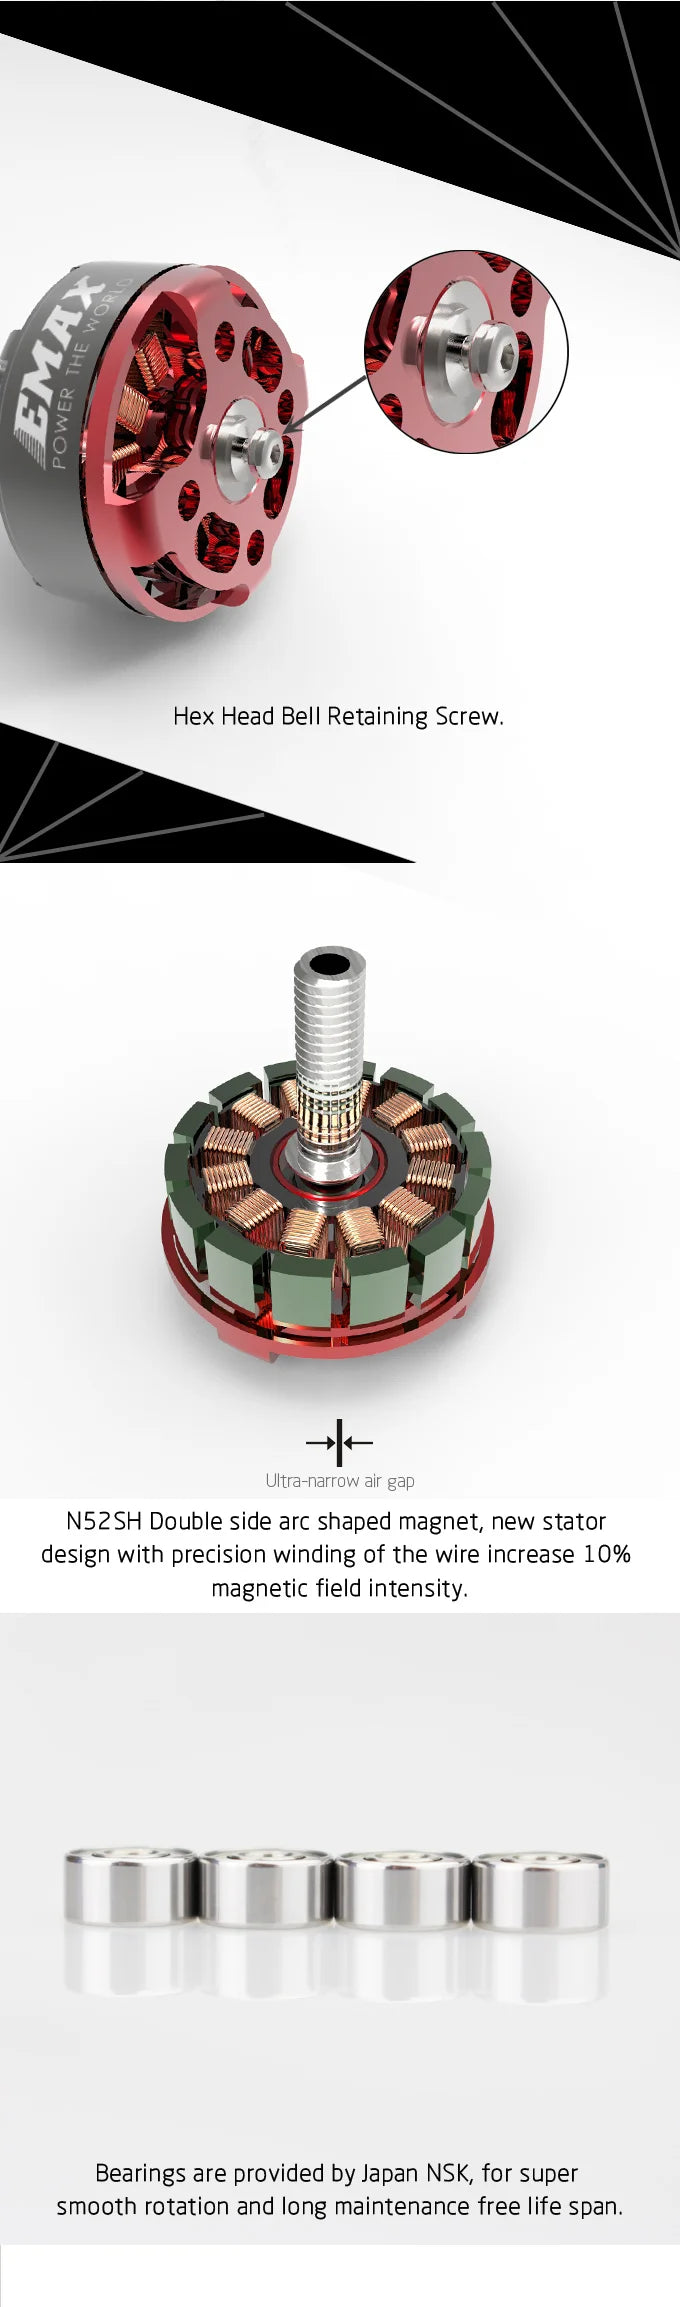 Emax RS2205 S Motor, NSZSH Double side arc shaped magnet, new stator design with precision wind